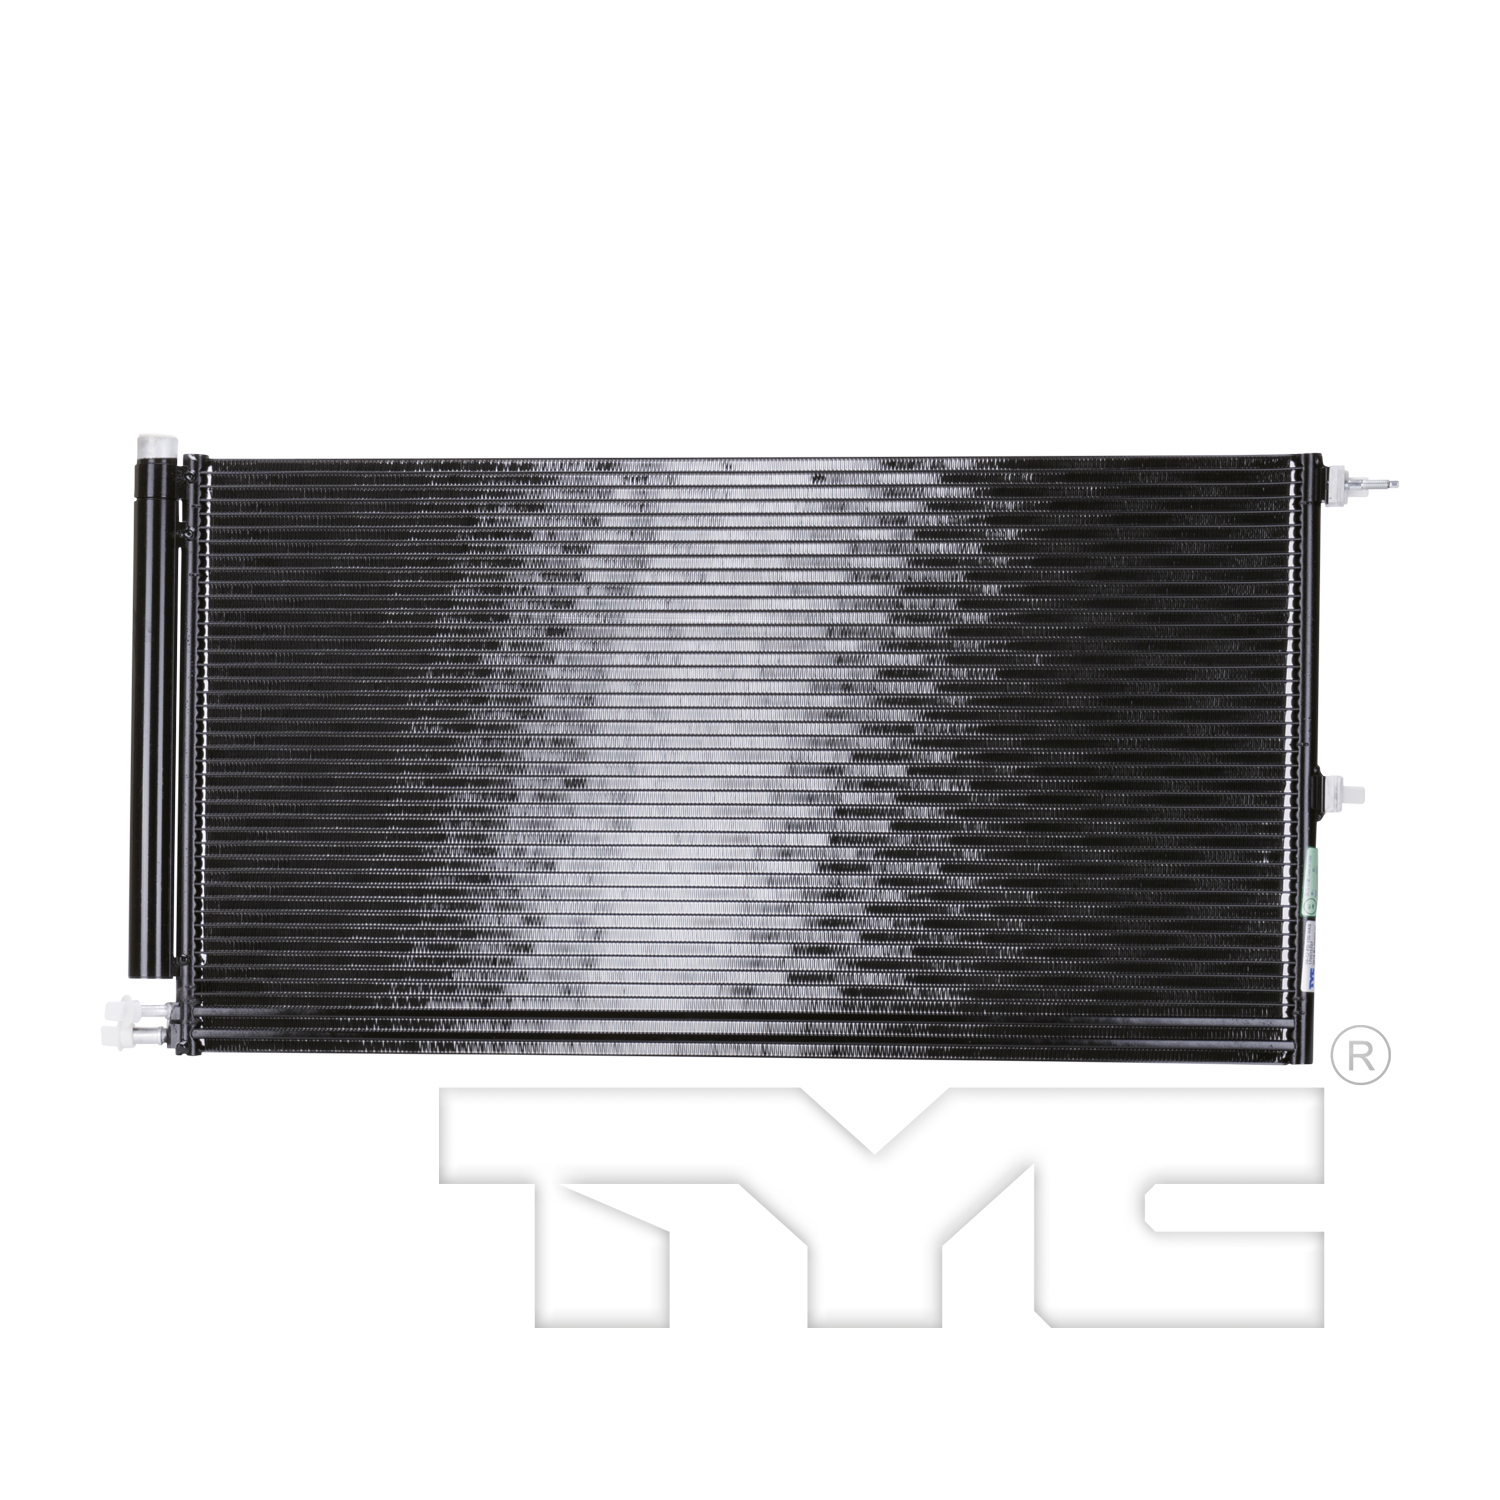 Aftermarket AC CONDENSERS for FORD - EXPEDITION, EXPEDITION,07-14,Air conditioning condenser